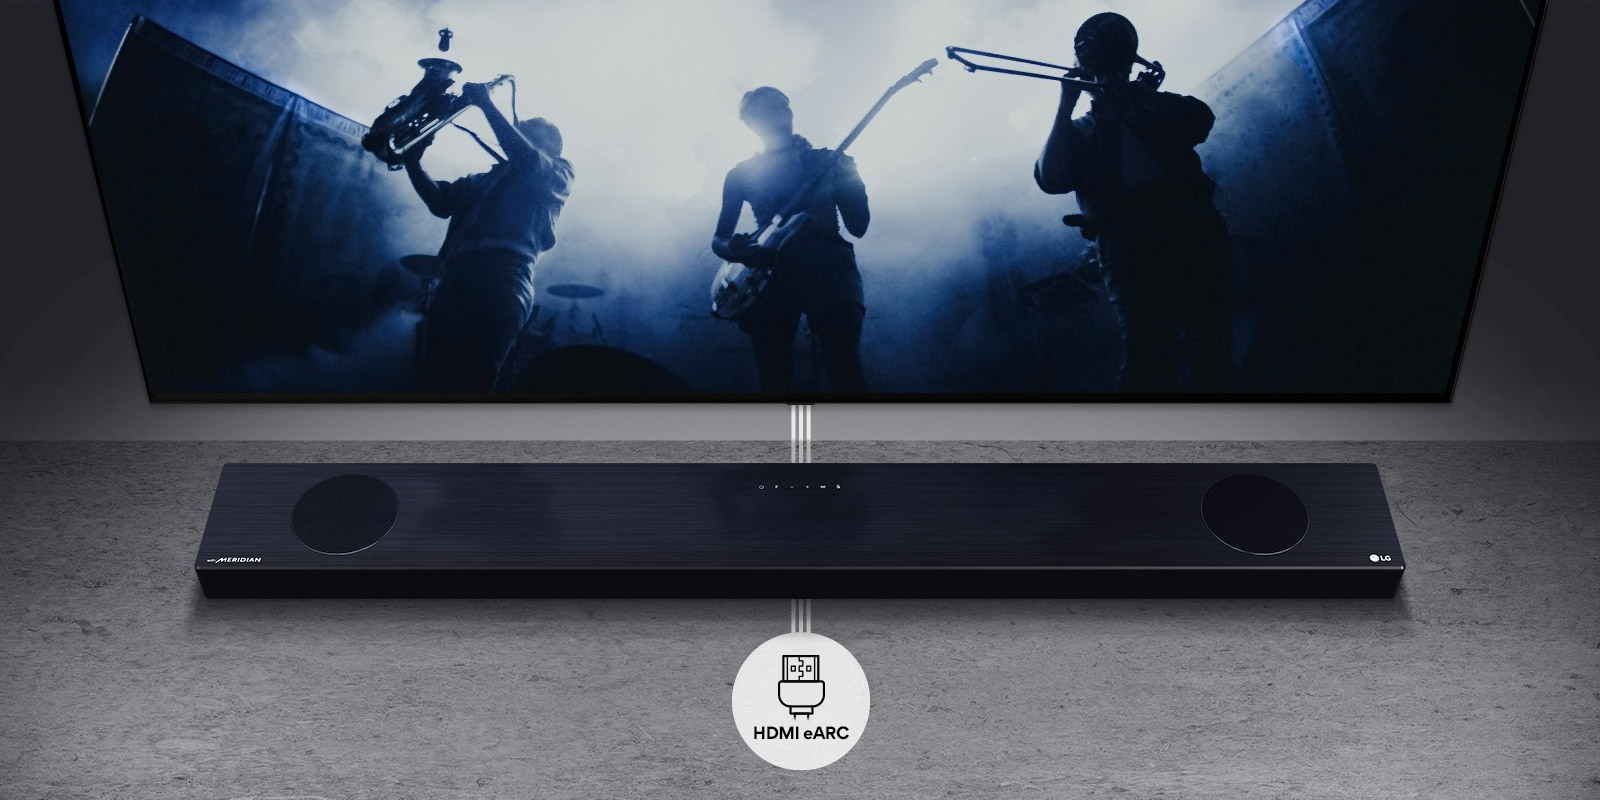 TV is on the wall. TV shows a group of band in black silhouette. LG Soundbar is right below TV on a gray shelf. There is a HDMI eARC icon below the soundbar.